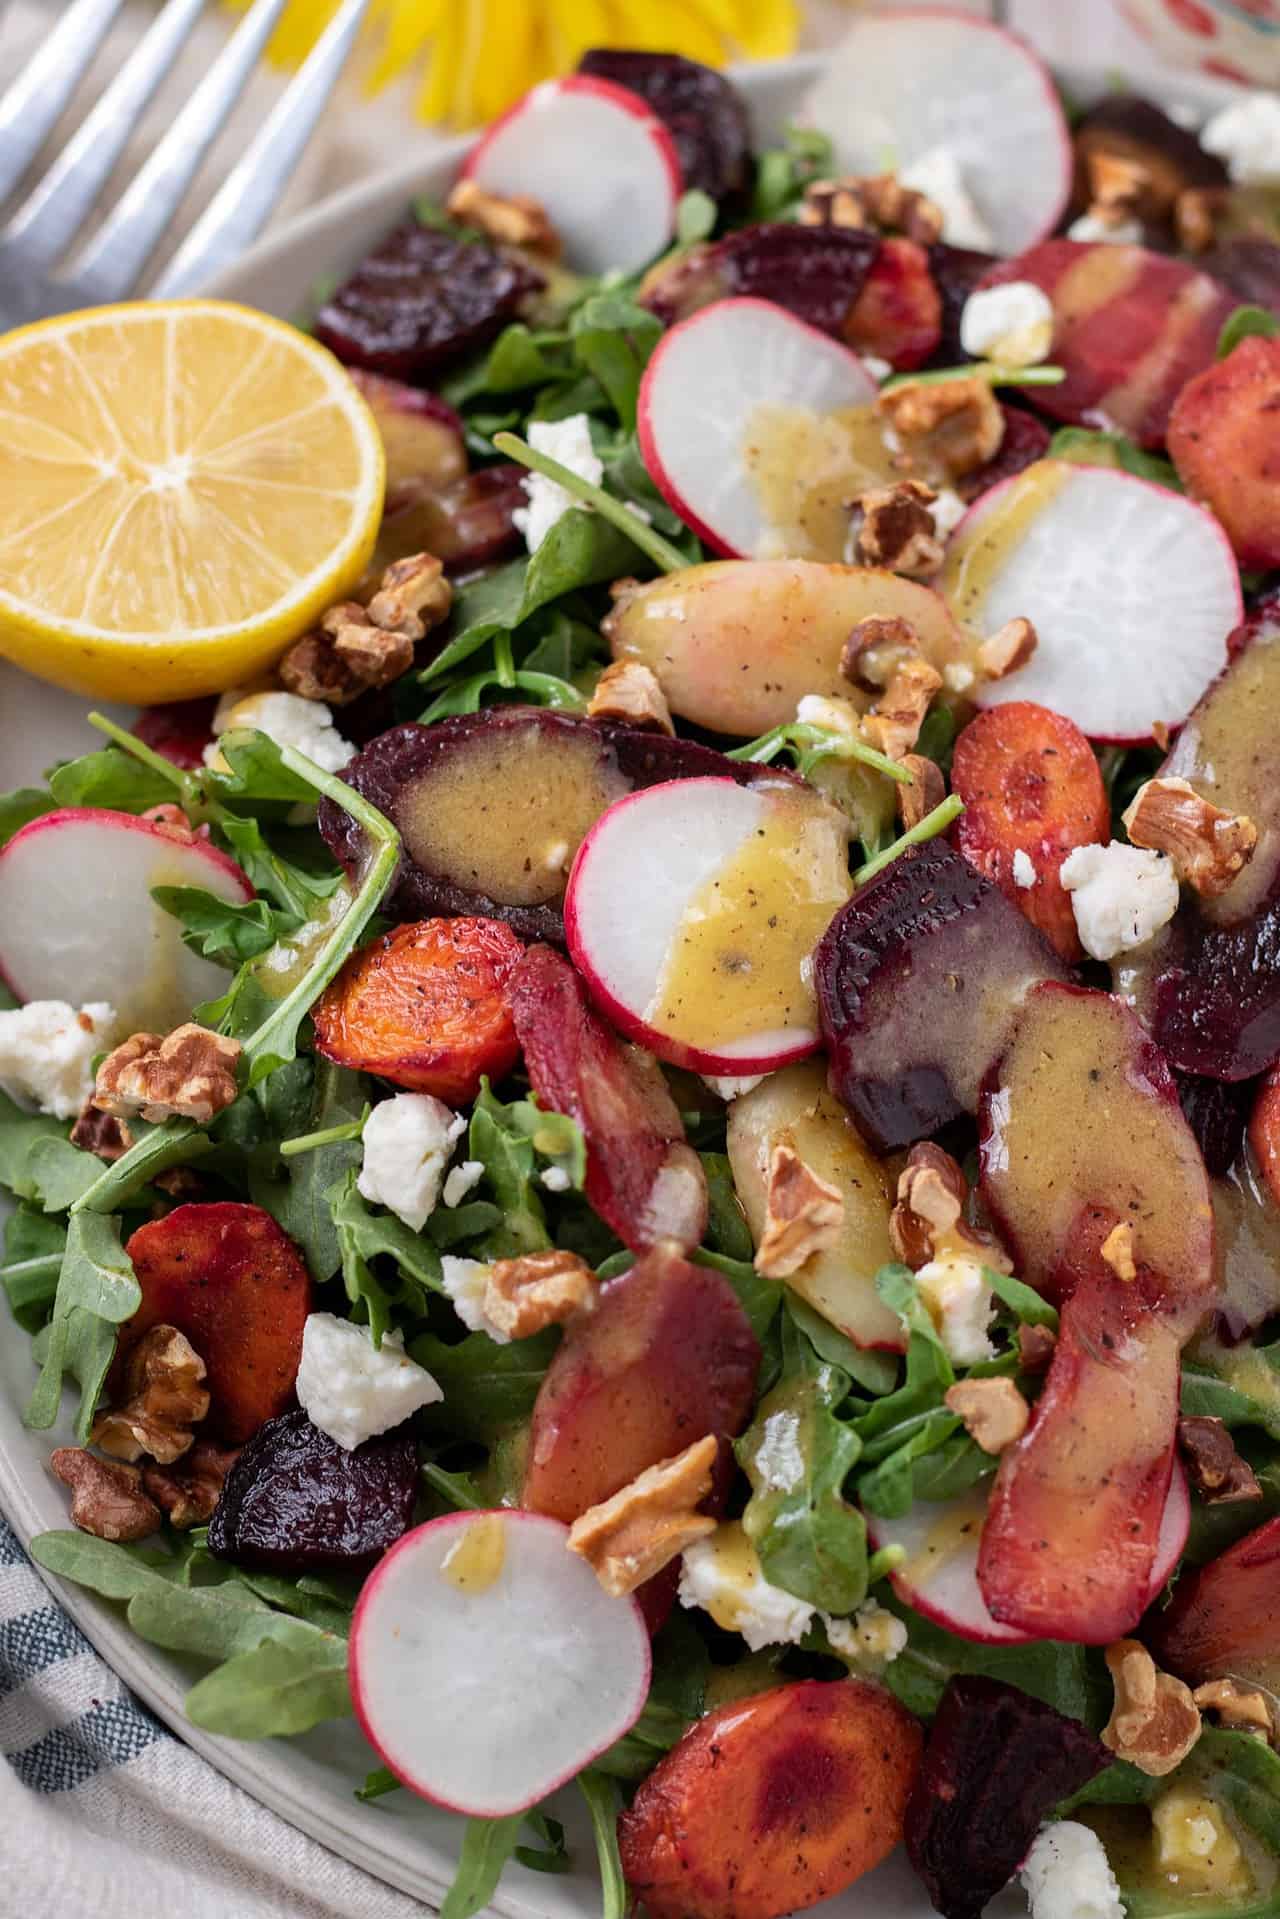 A close up shot of a large arugula salad that's topped with roasted rainbow carrots, beets, goat cheese, walnuts and radishes. There's a half of a lemon in the background and the salad is drizzled with a Dijon maple dressing.